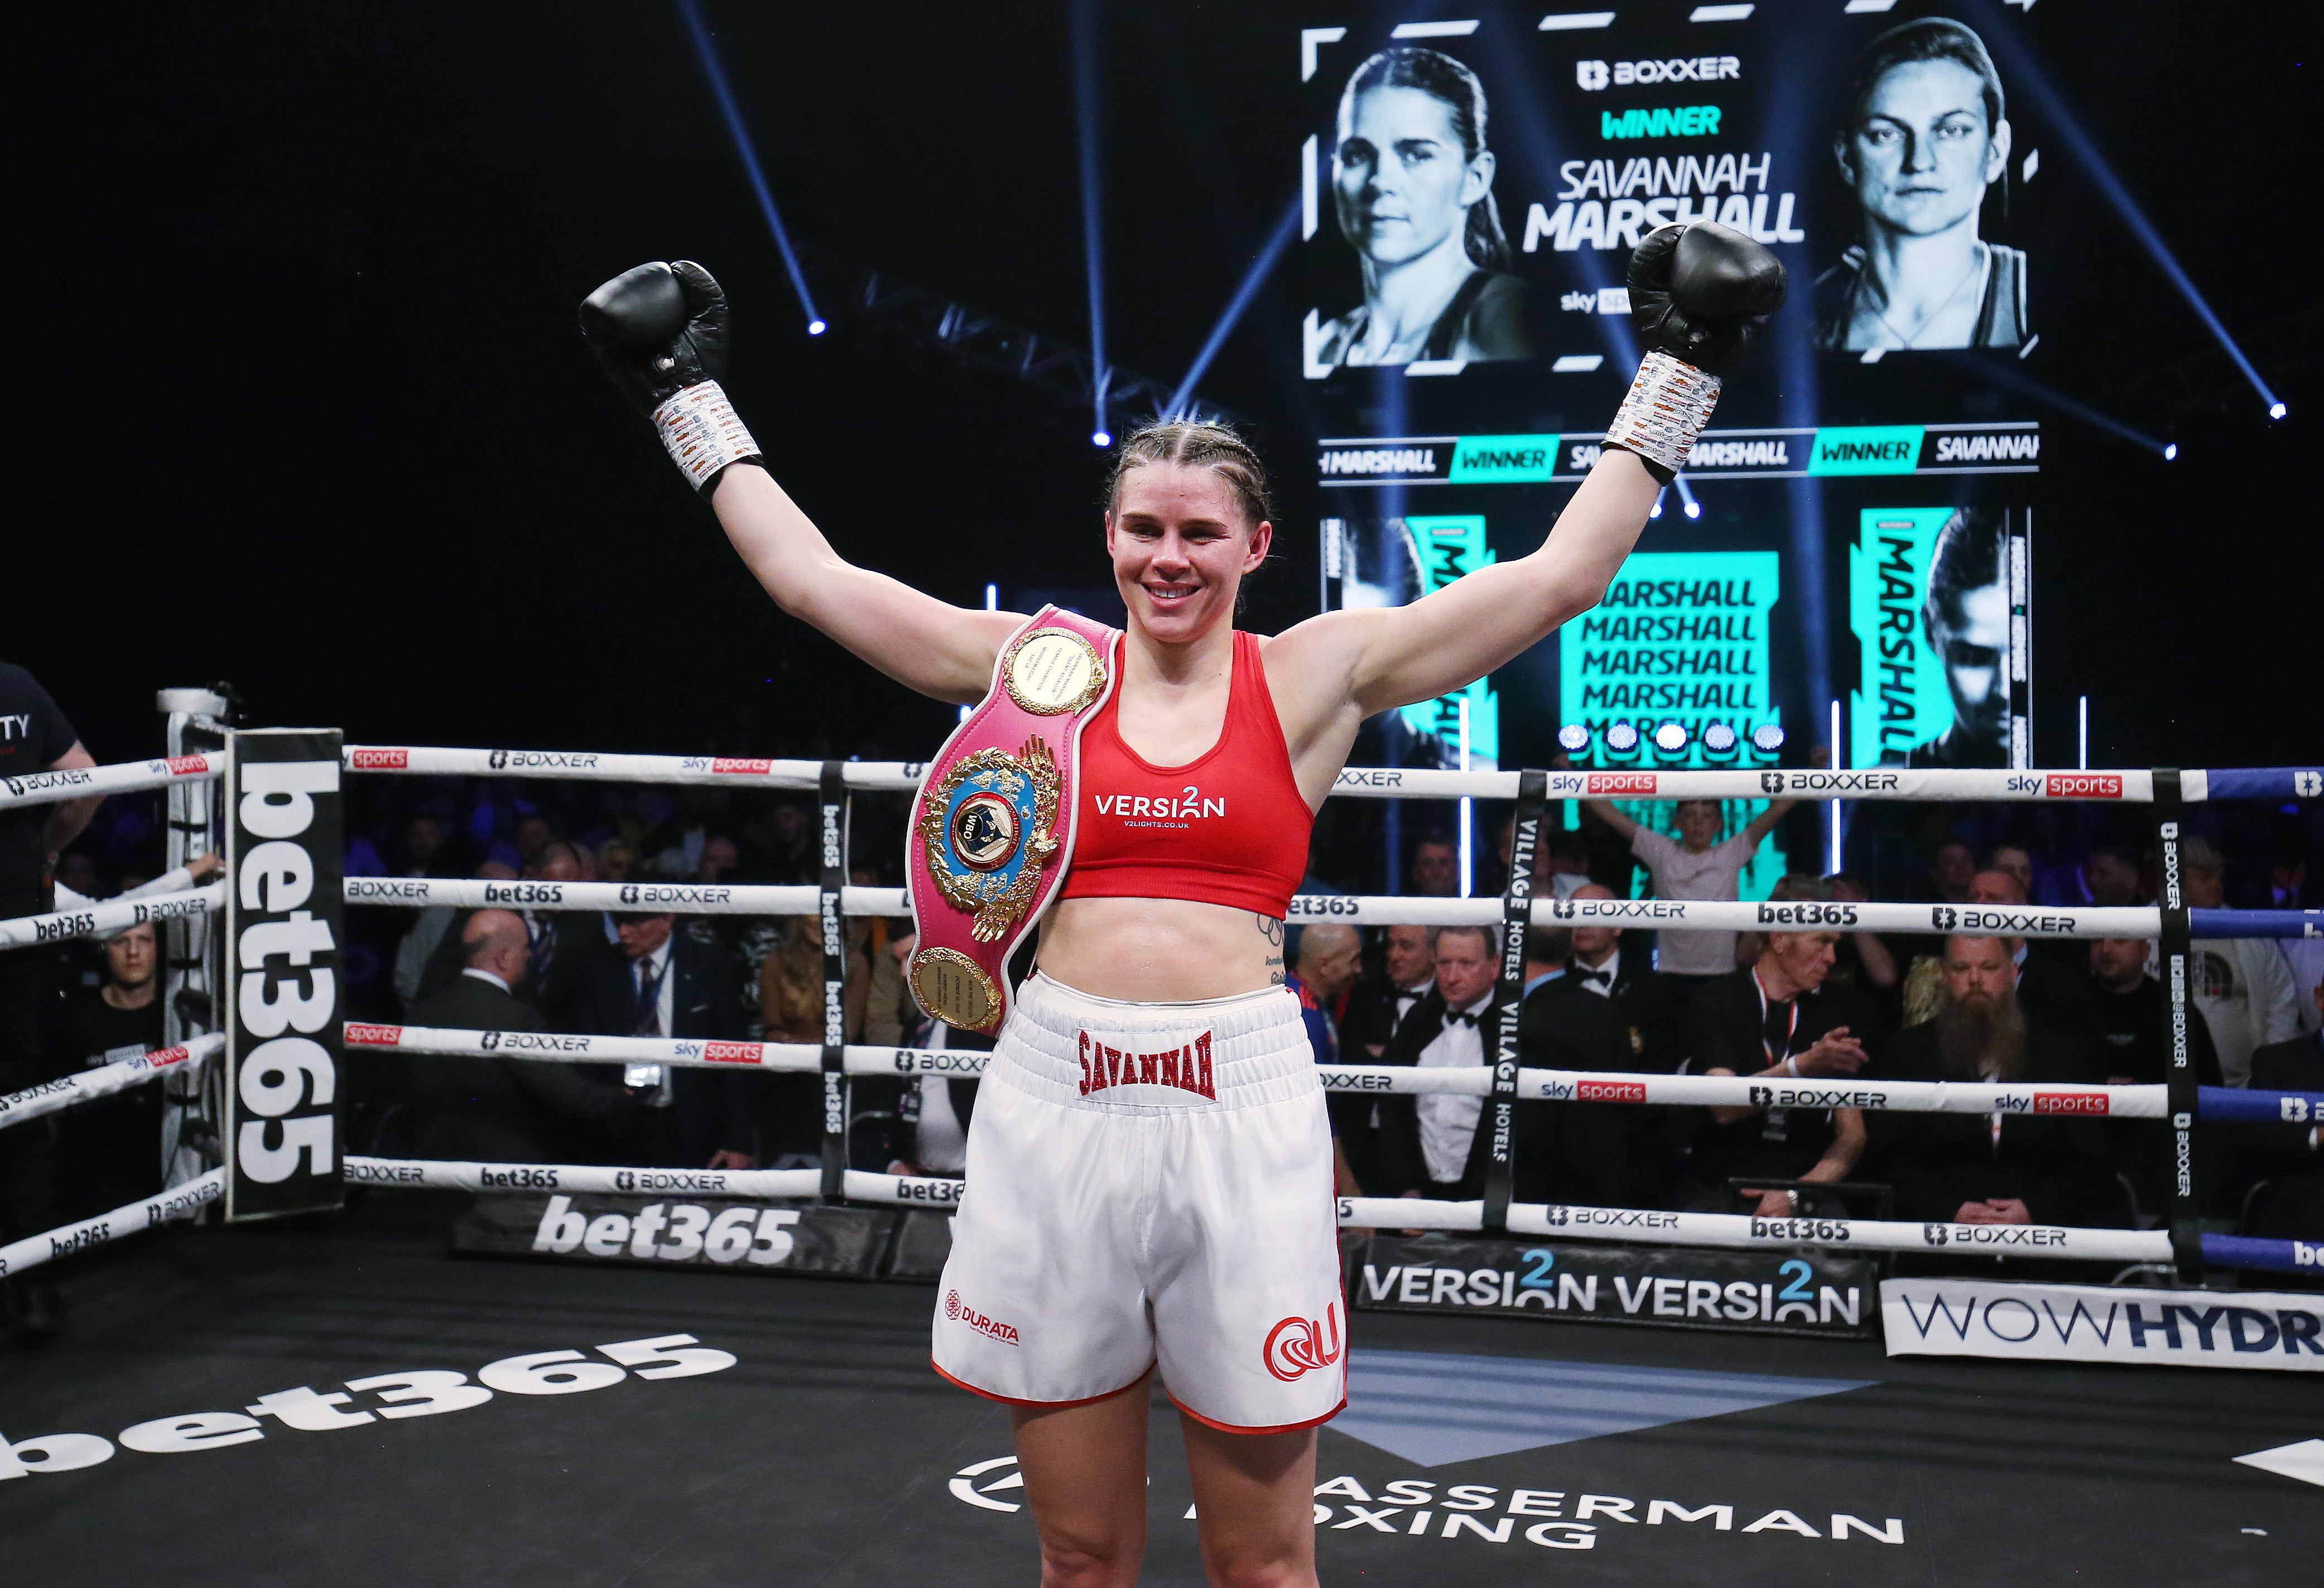 Marshall has now stopped or knocked out ten of the 12 women she has beaten